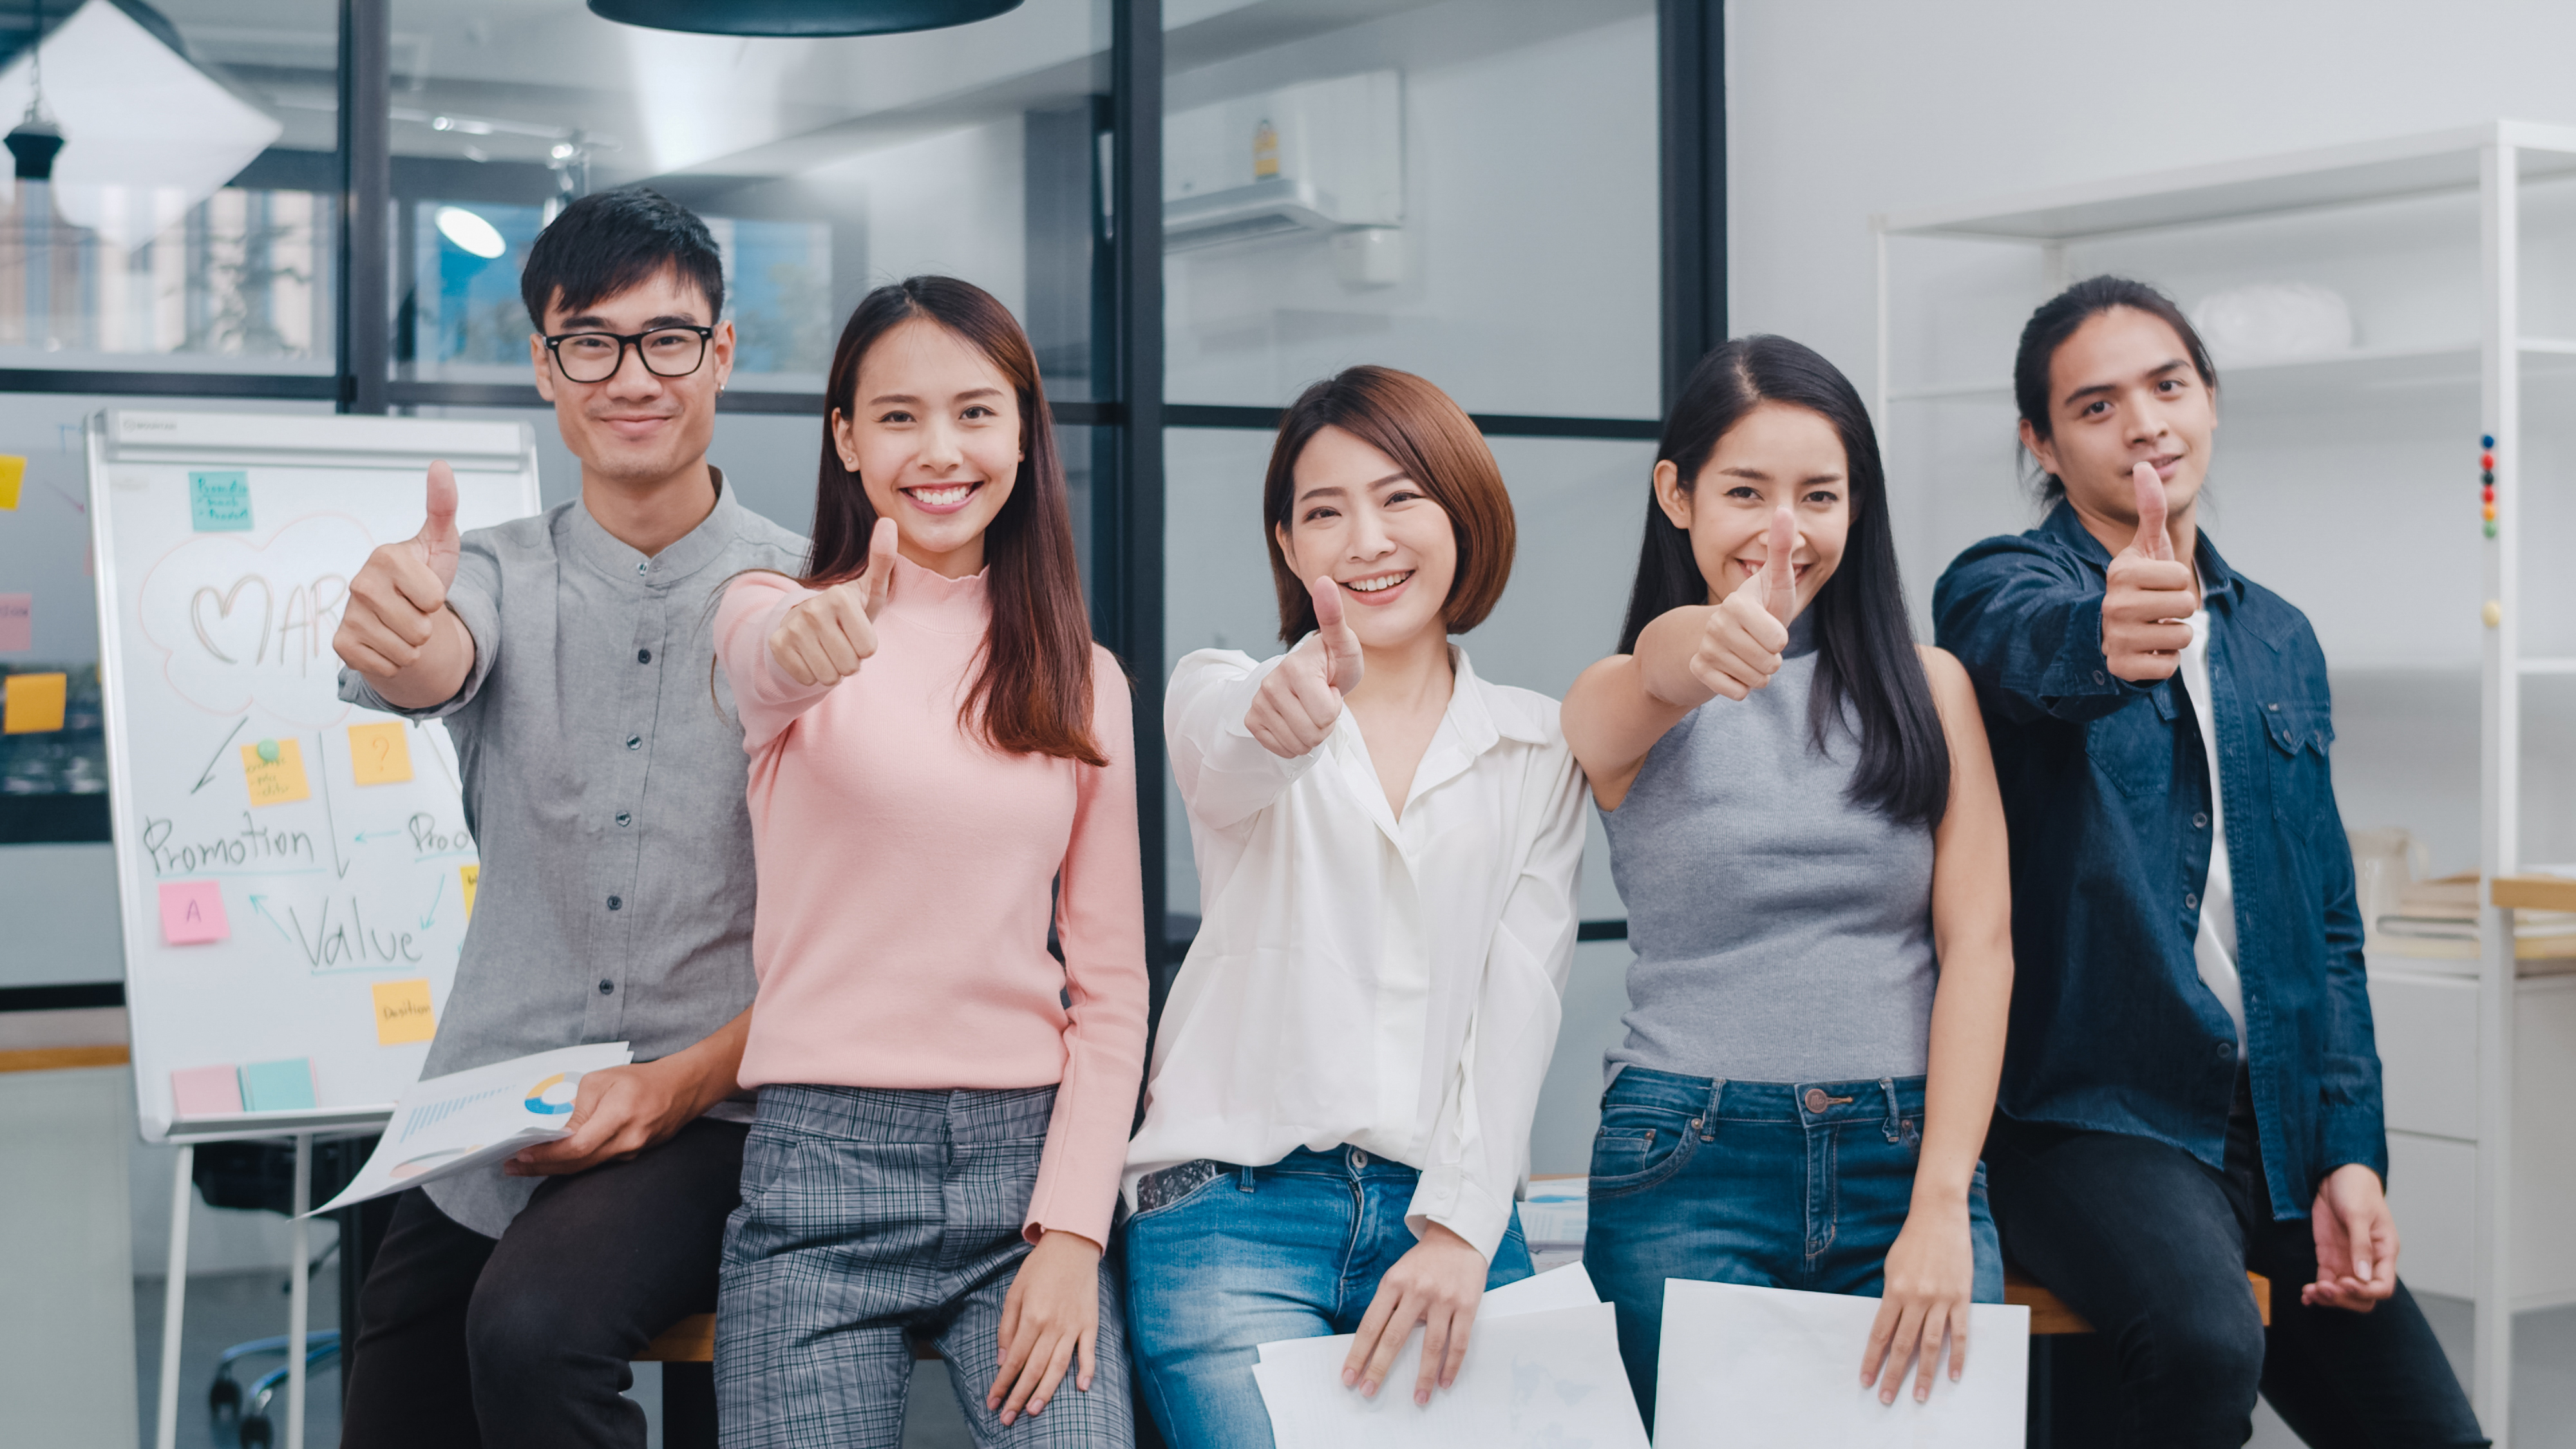 https://img.moneyduck.com/article_attachment/1664875390-group-asia-young-creative-people-smart-casual-wear-smiling-thumbs-up-creative-office-workplace.jpg